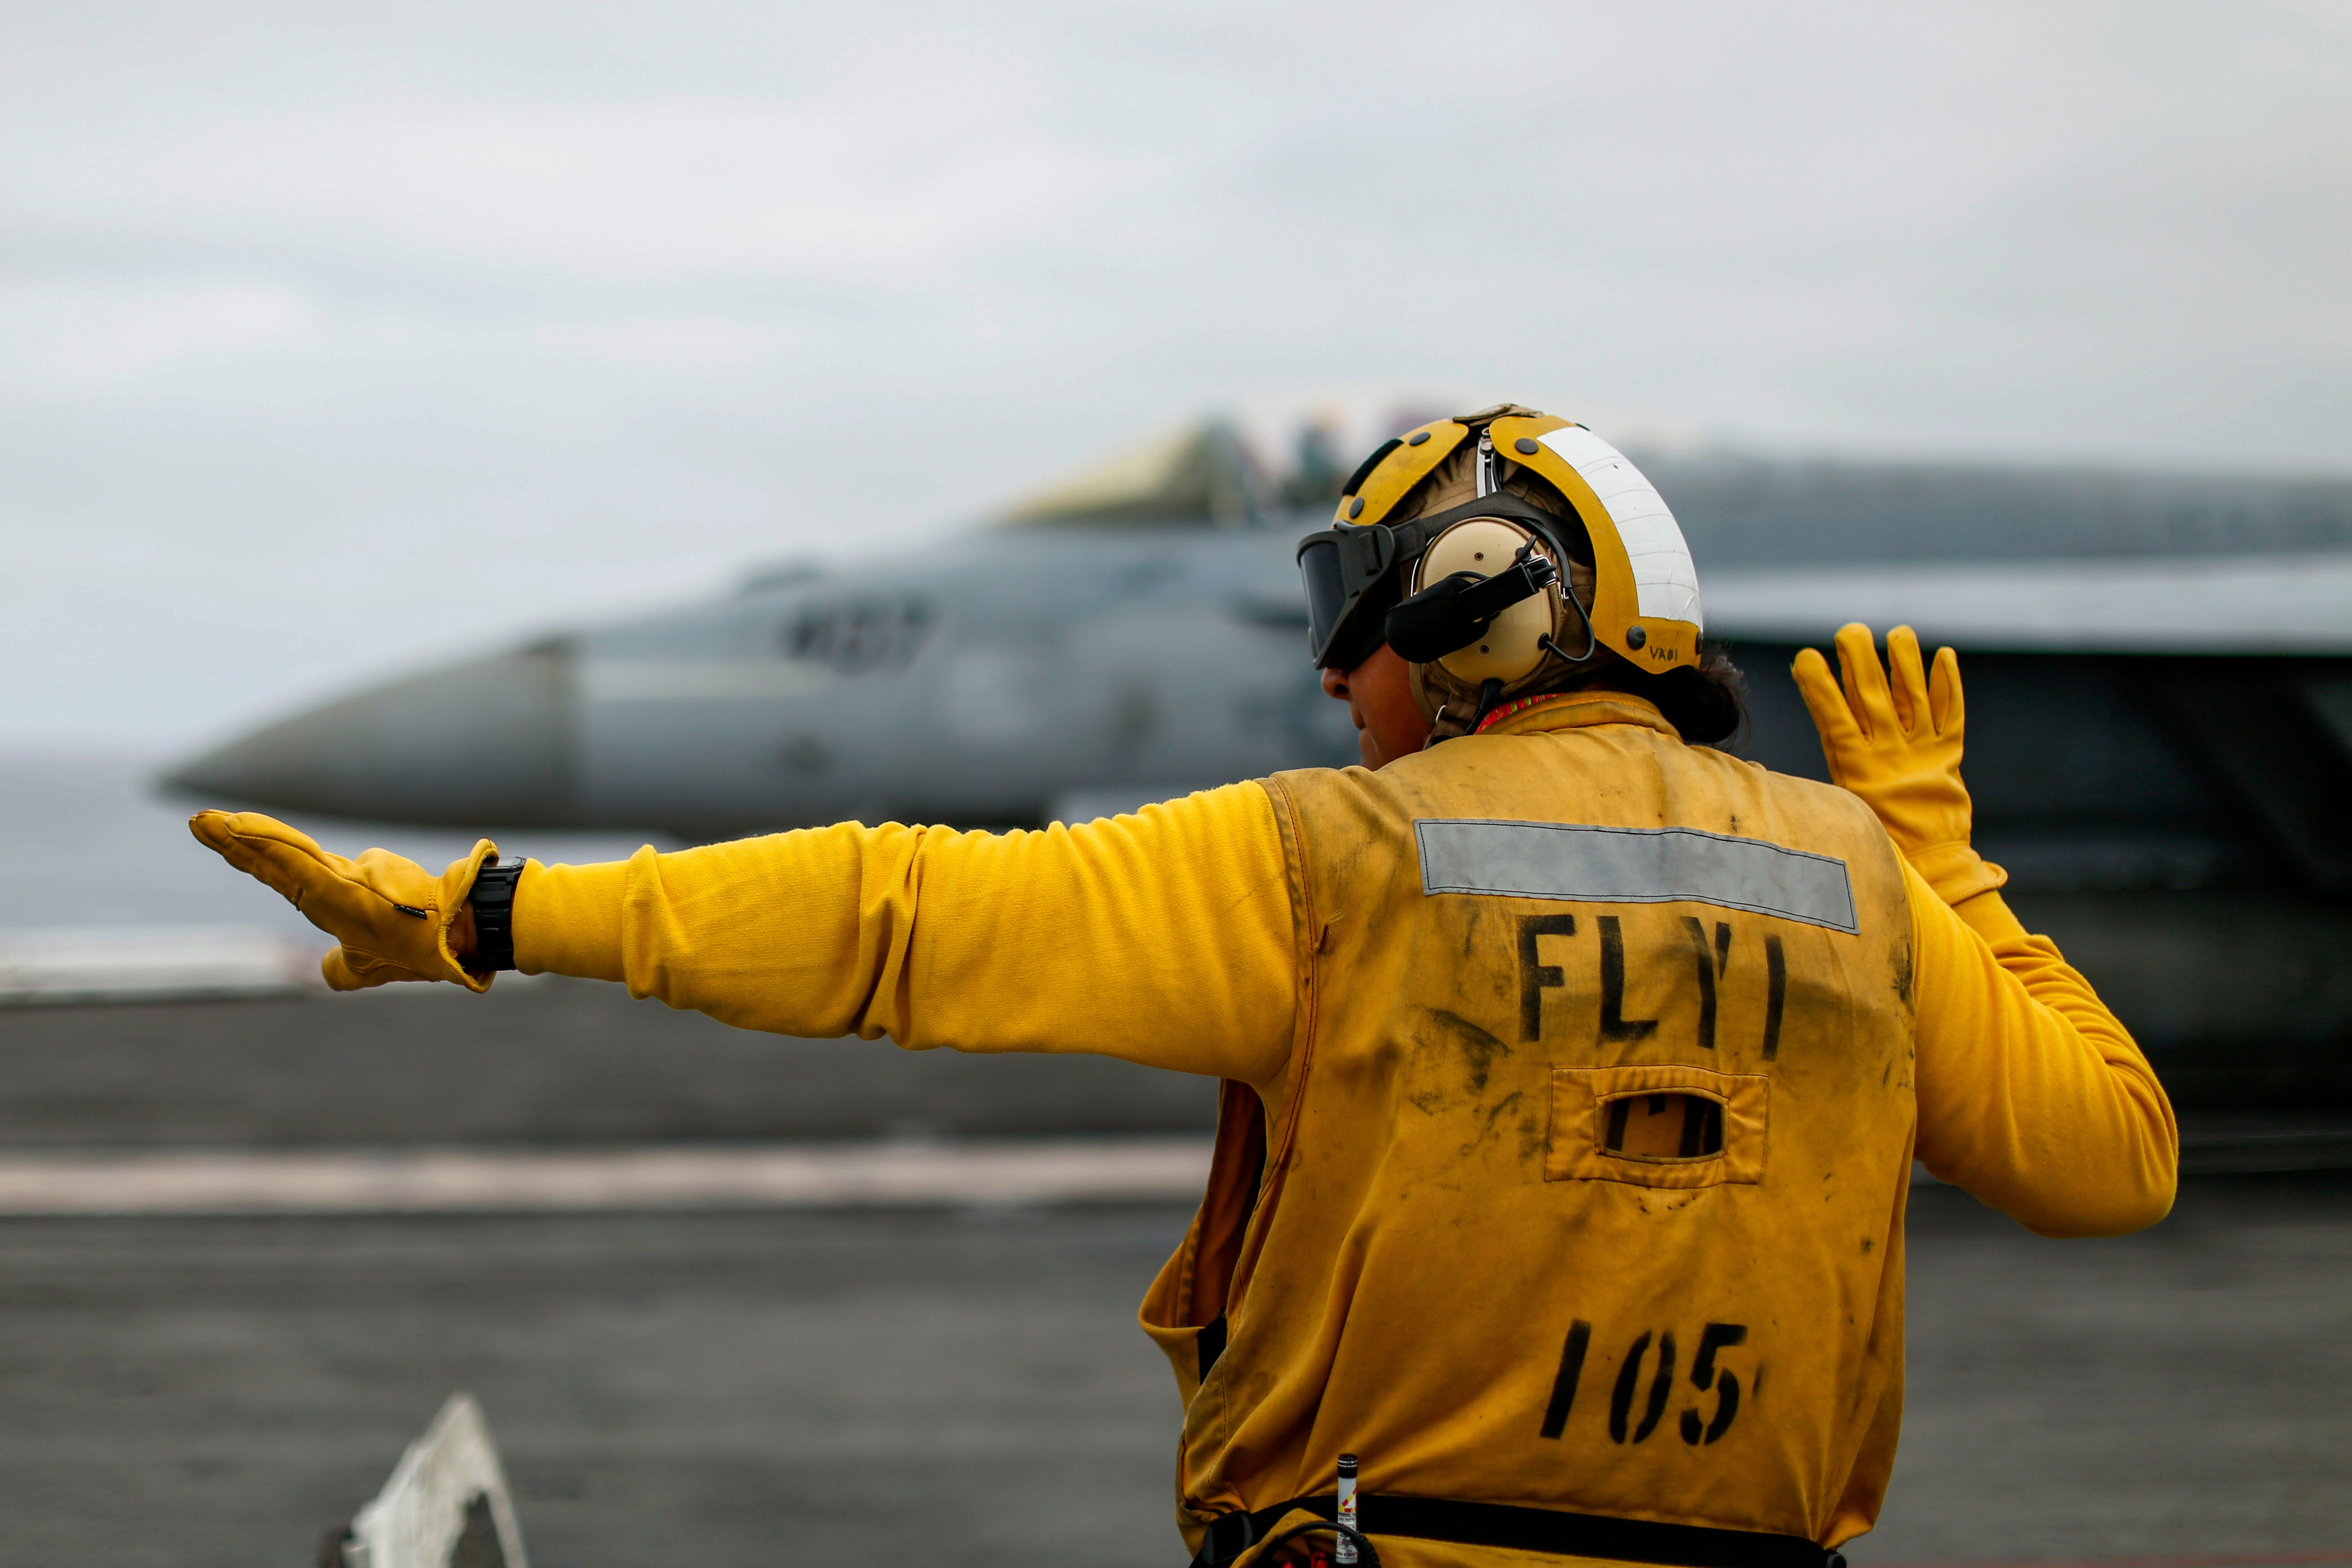 Navy Petty Officer 2nd Class Estrella Santoya signals to an F/A-18E Super Hornet on the flight deck of the USS Abraham Lincoln in the Pacific Ocean, Nov. 6, 2021.